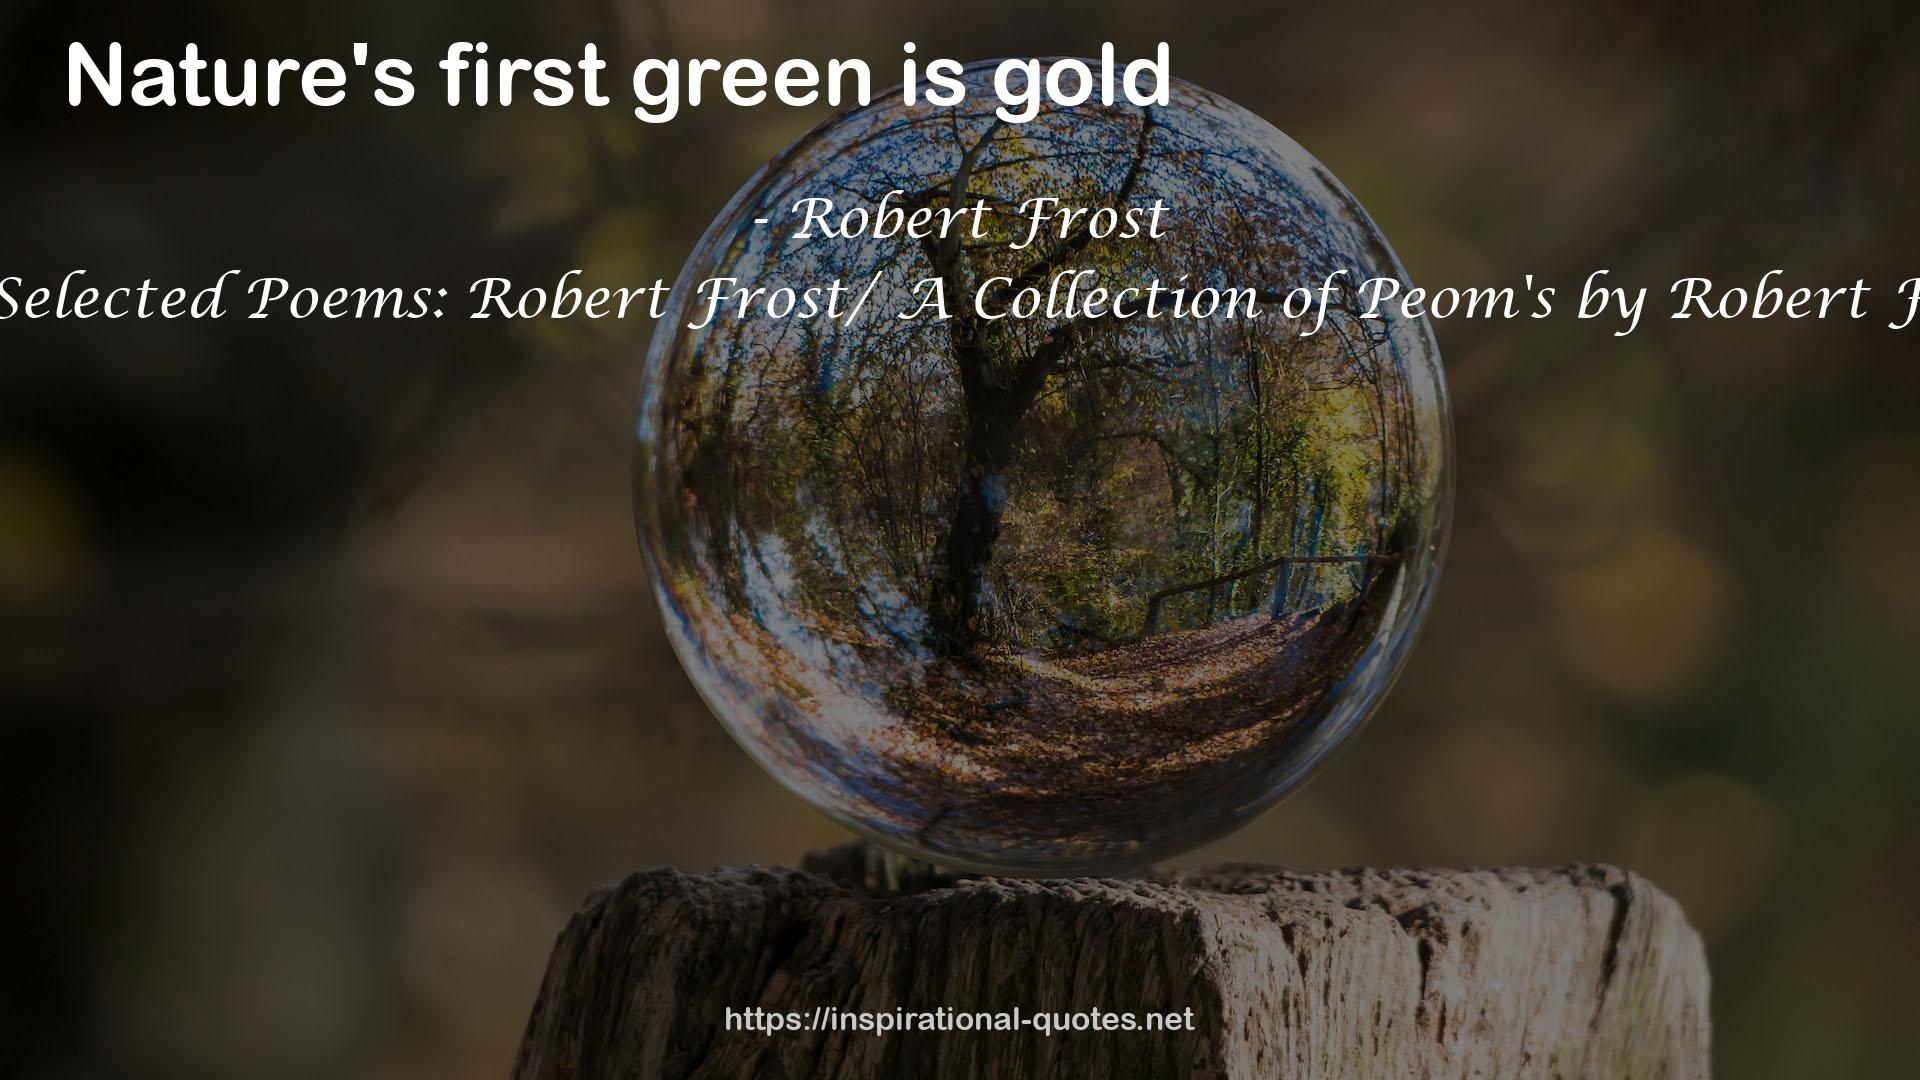 100 Selected Poems: Robert Frost/ A Collection of Peom's by Robert Frost QUOTES